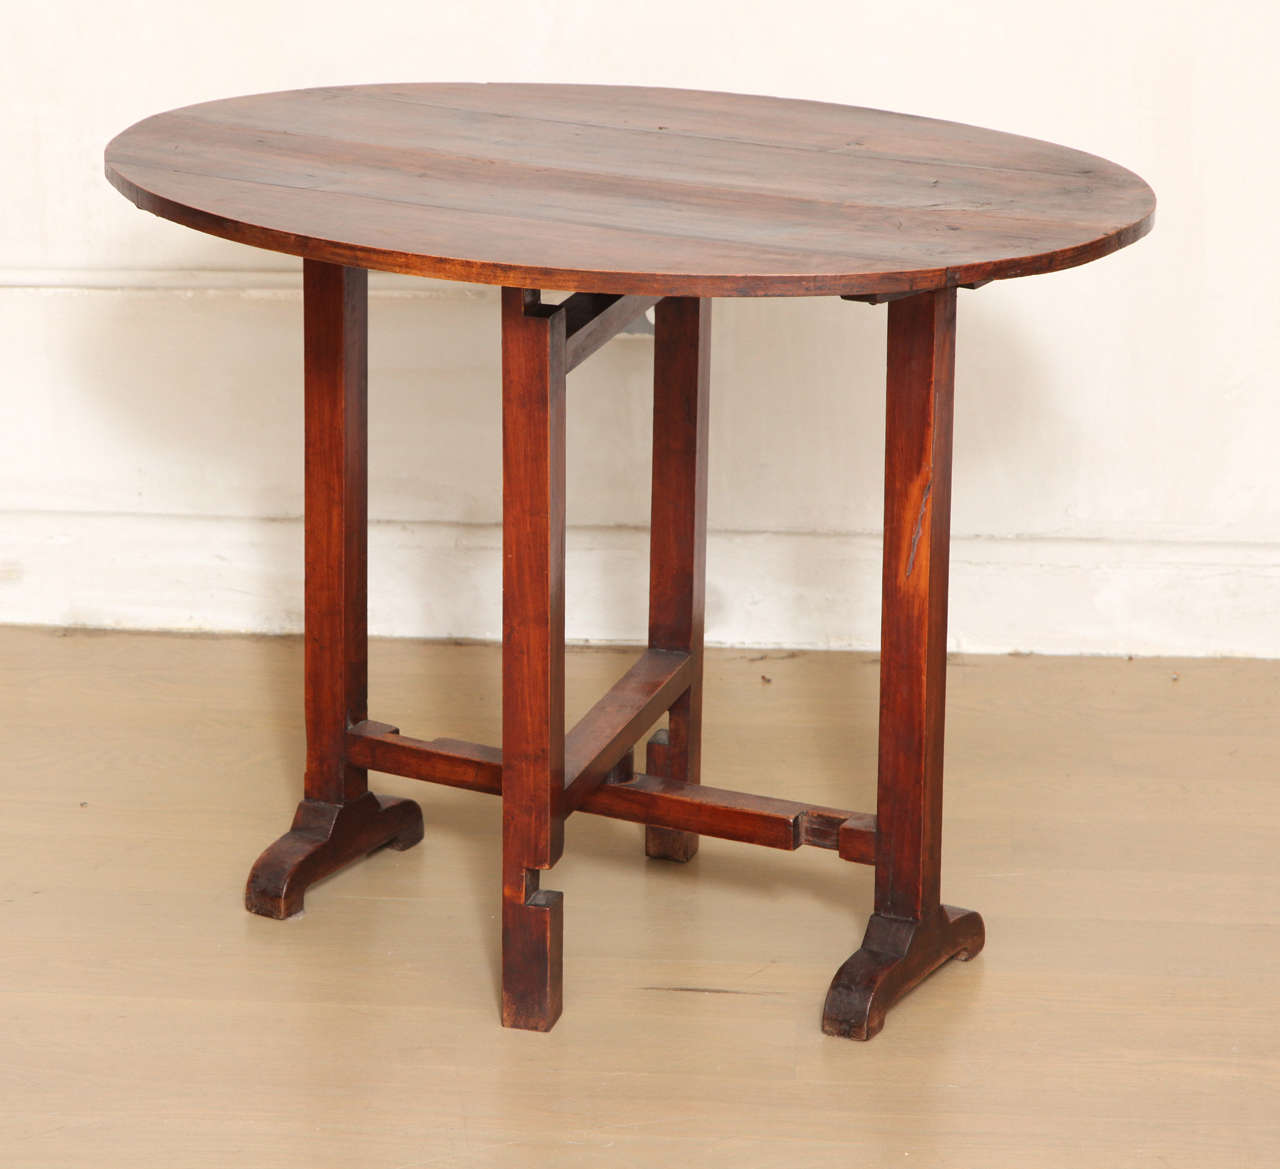 French Oval Cherry Folding Tilt Top Side Table, Late 19th or 20th Century For Sale 3